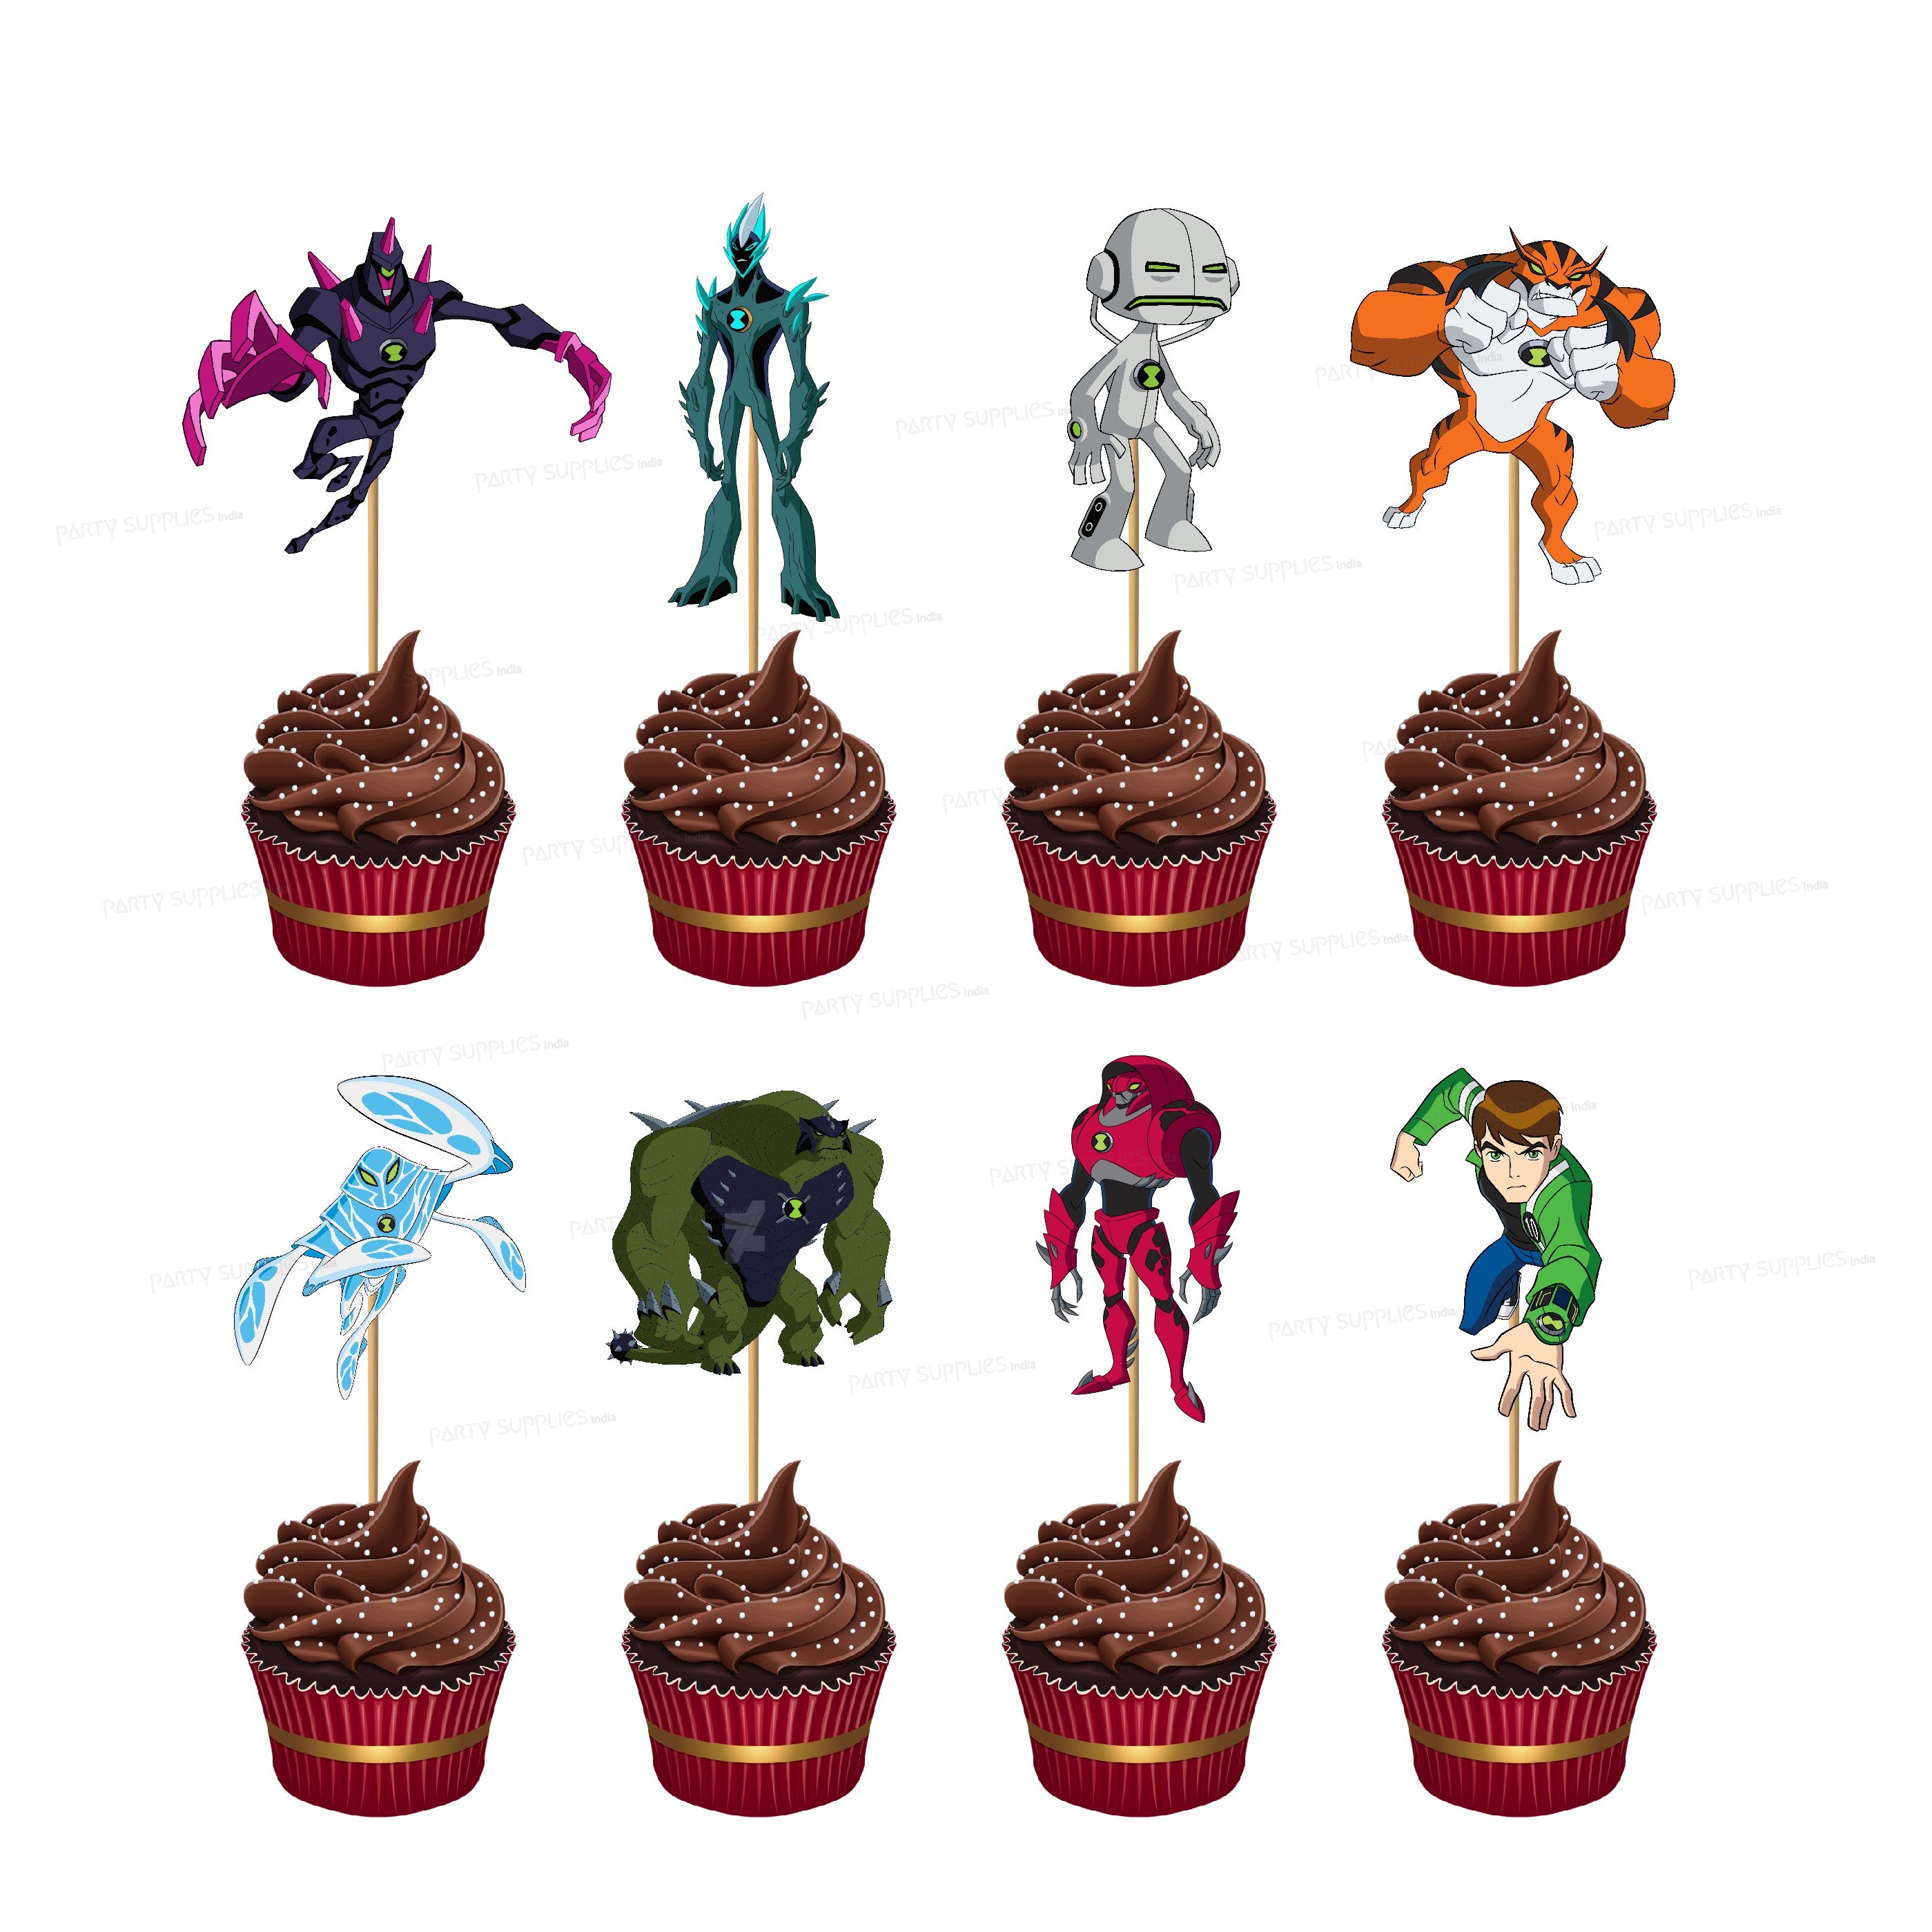 PSI Ben 10 Theme Classic Cup Cake Topper